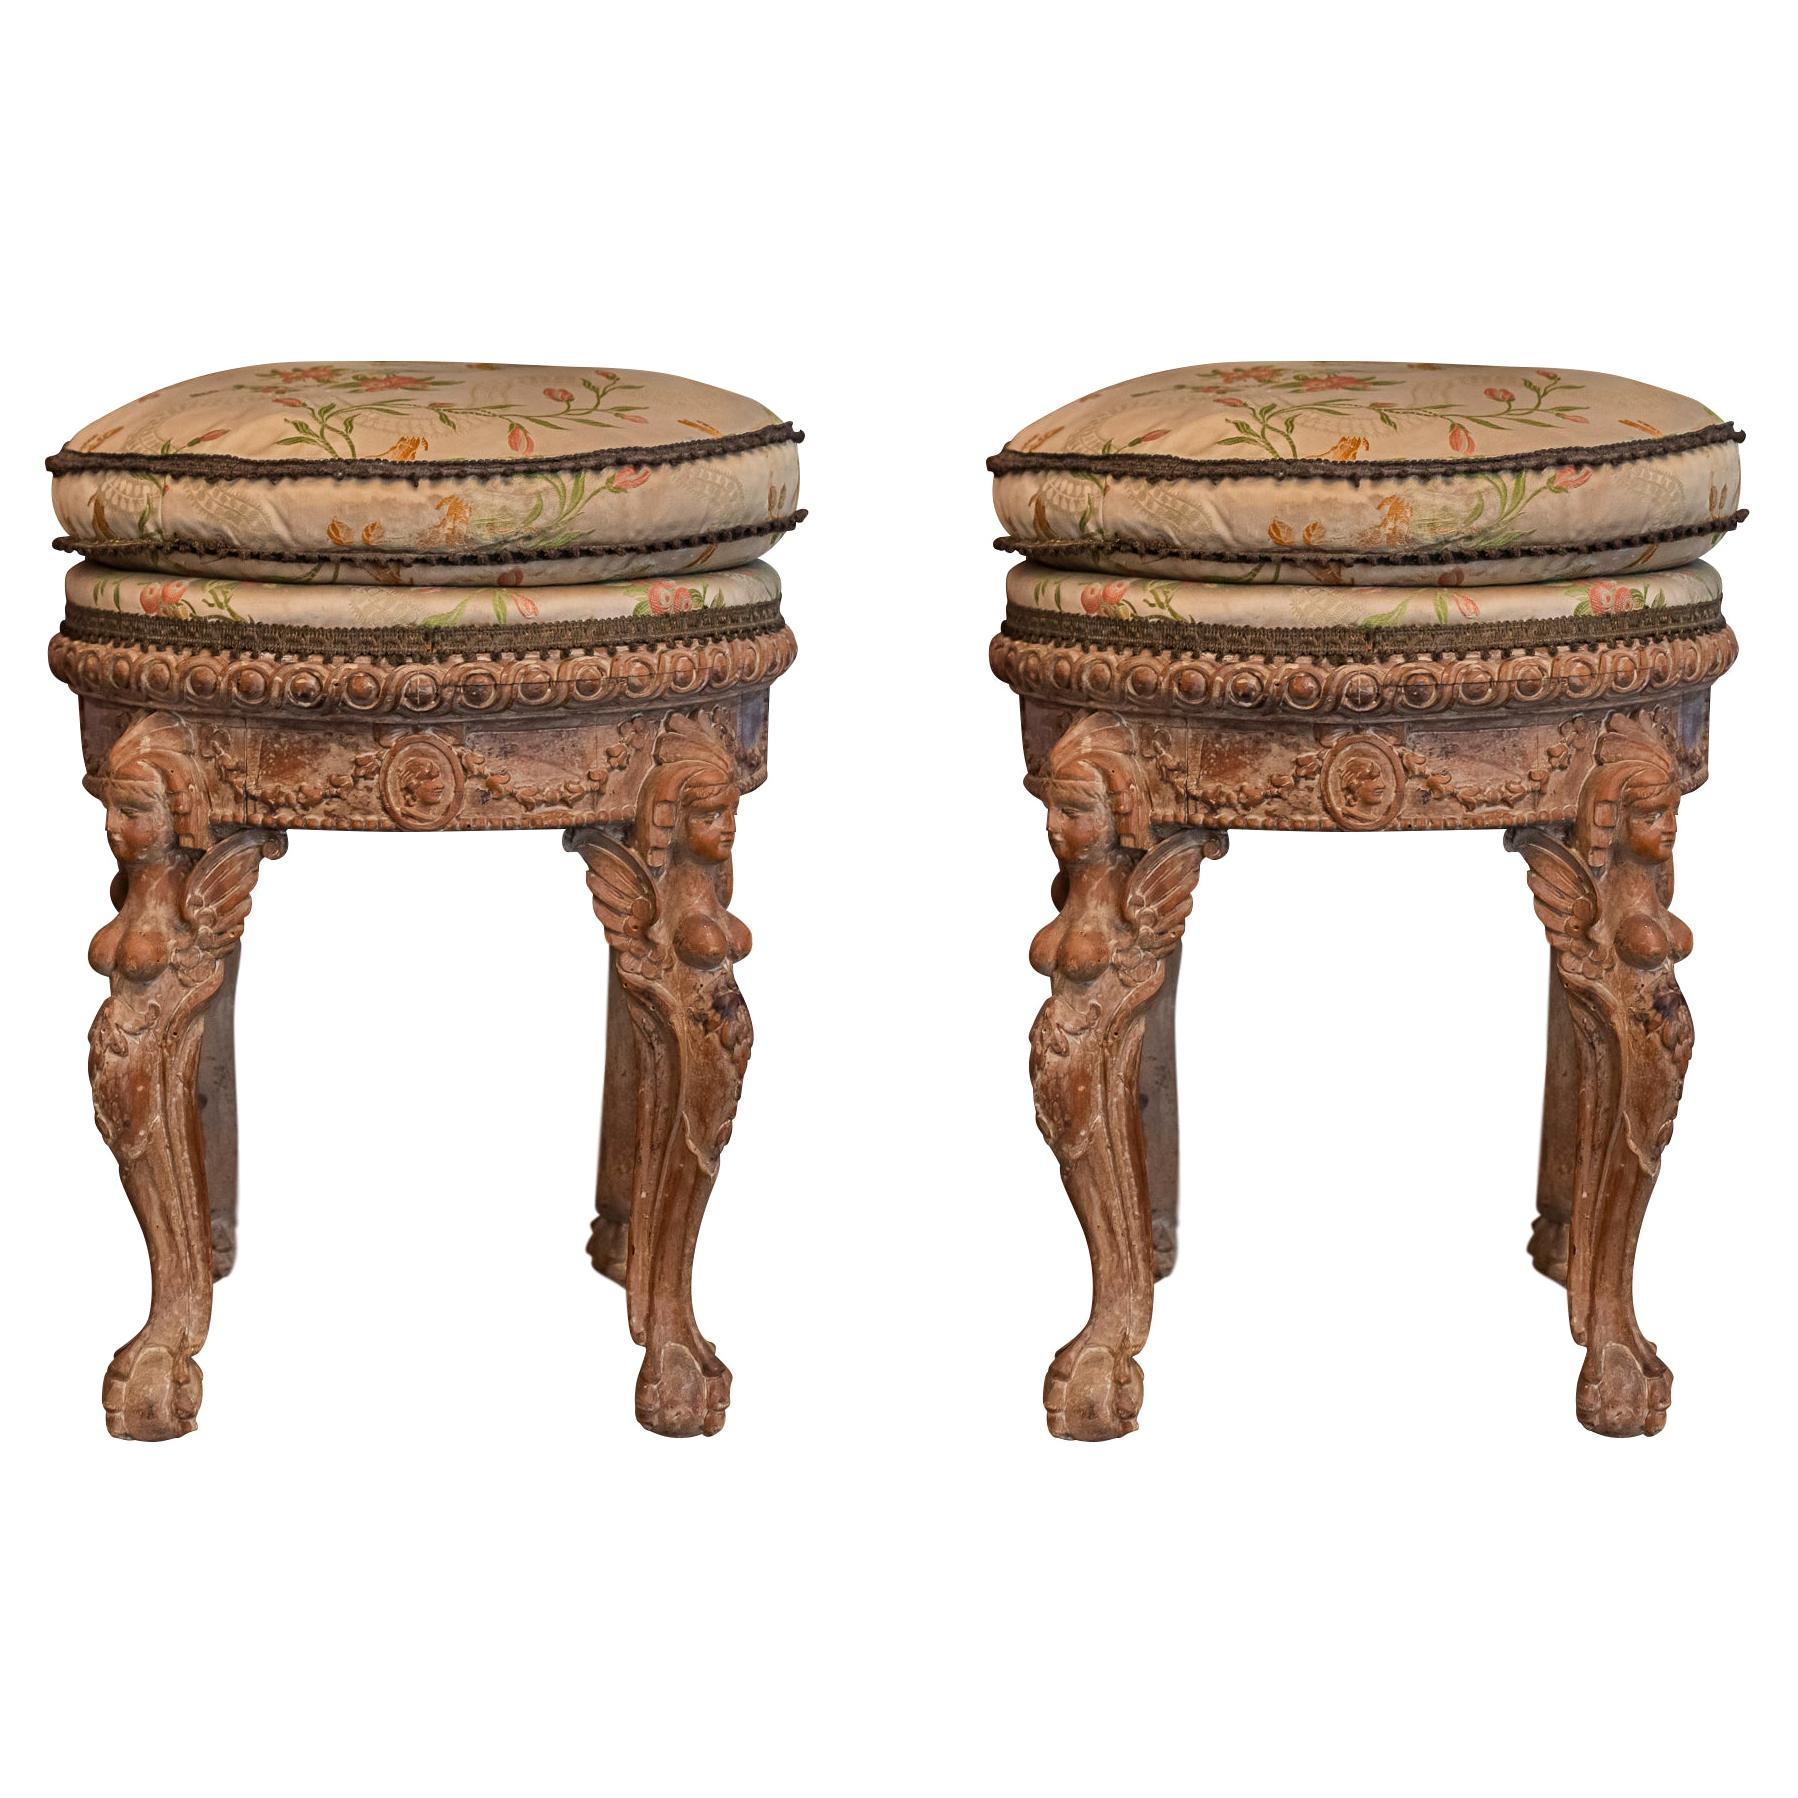 Pair of Round Stools, Sculpted Wood, Late 18th Century, France